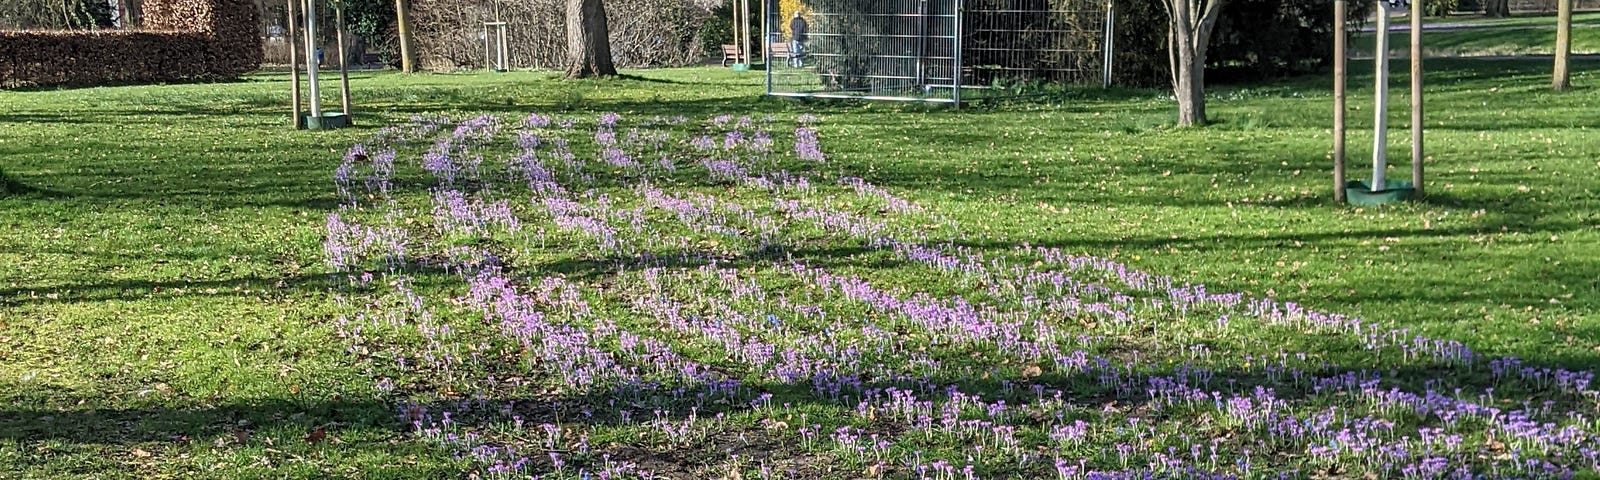 Rows of violets blooming in a schoolyard